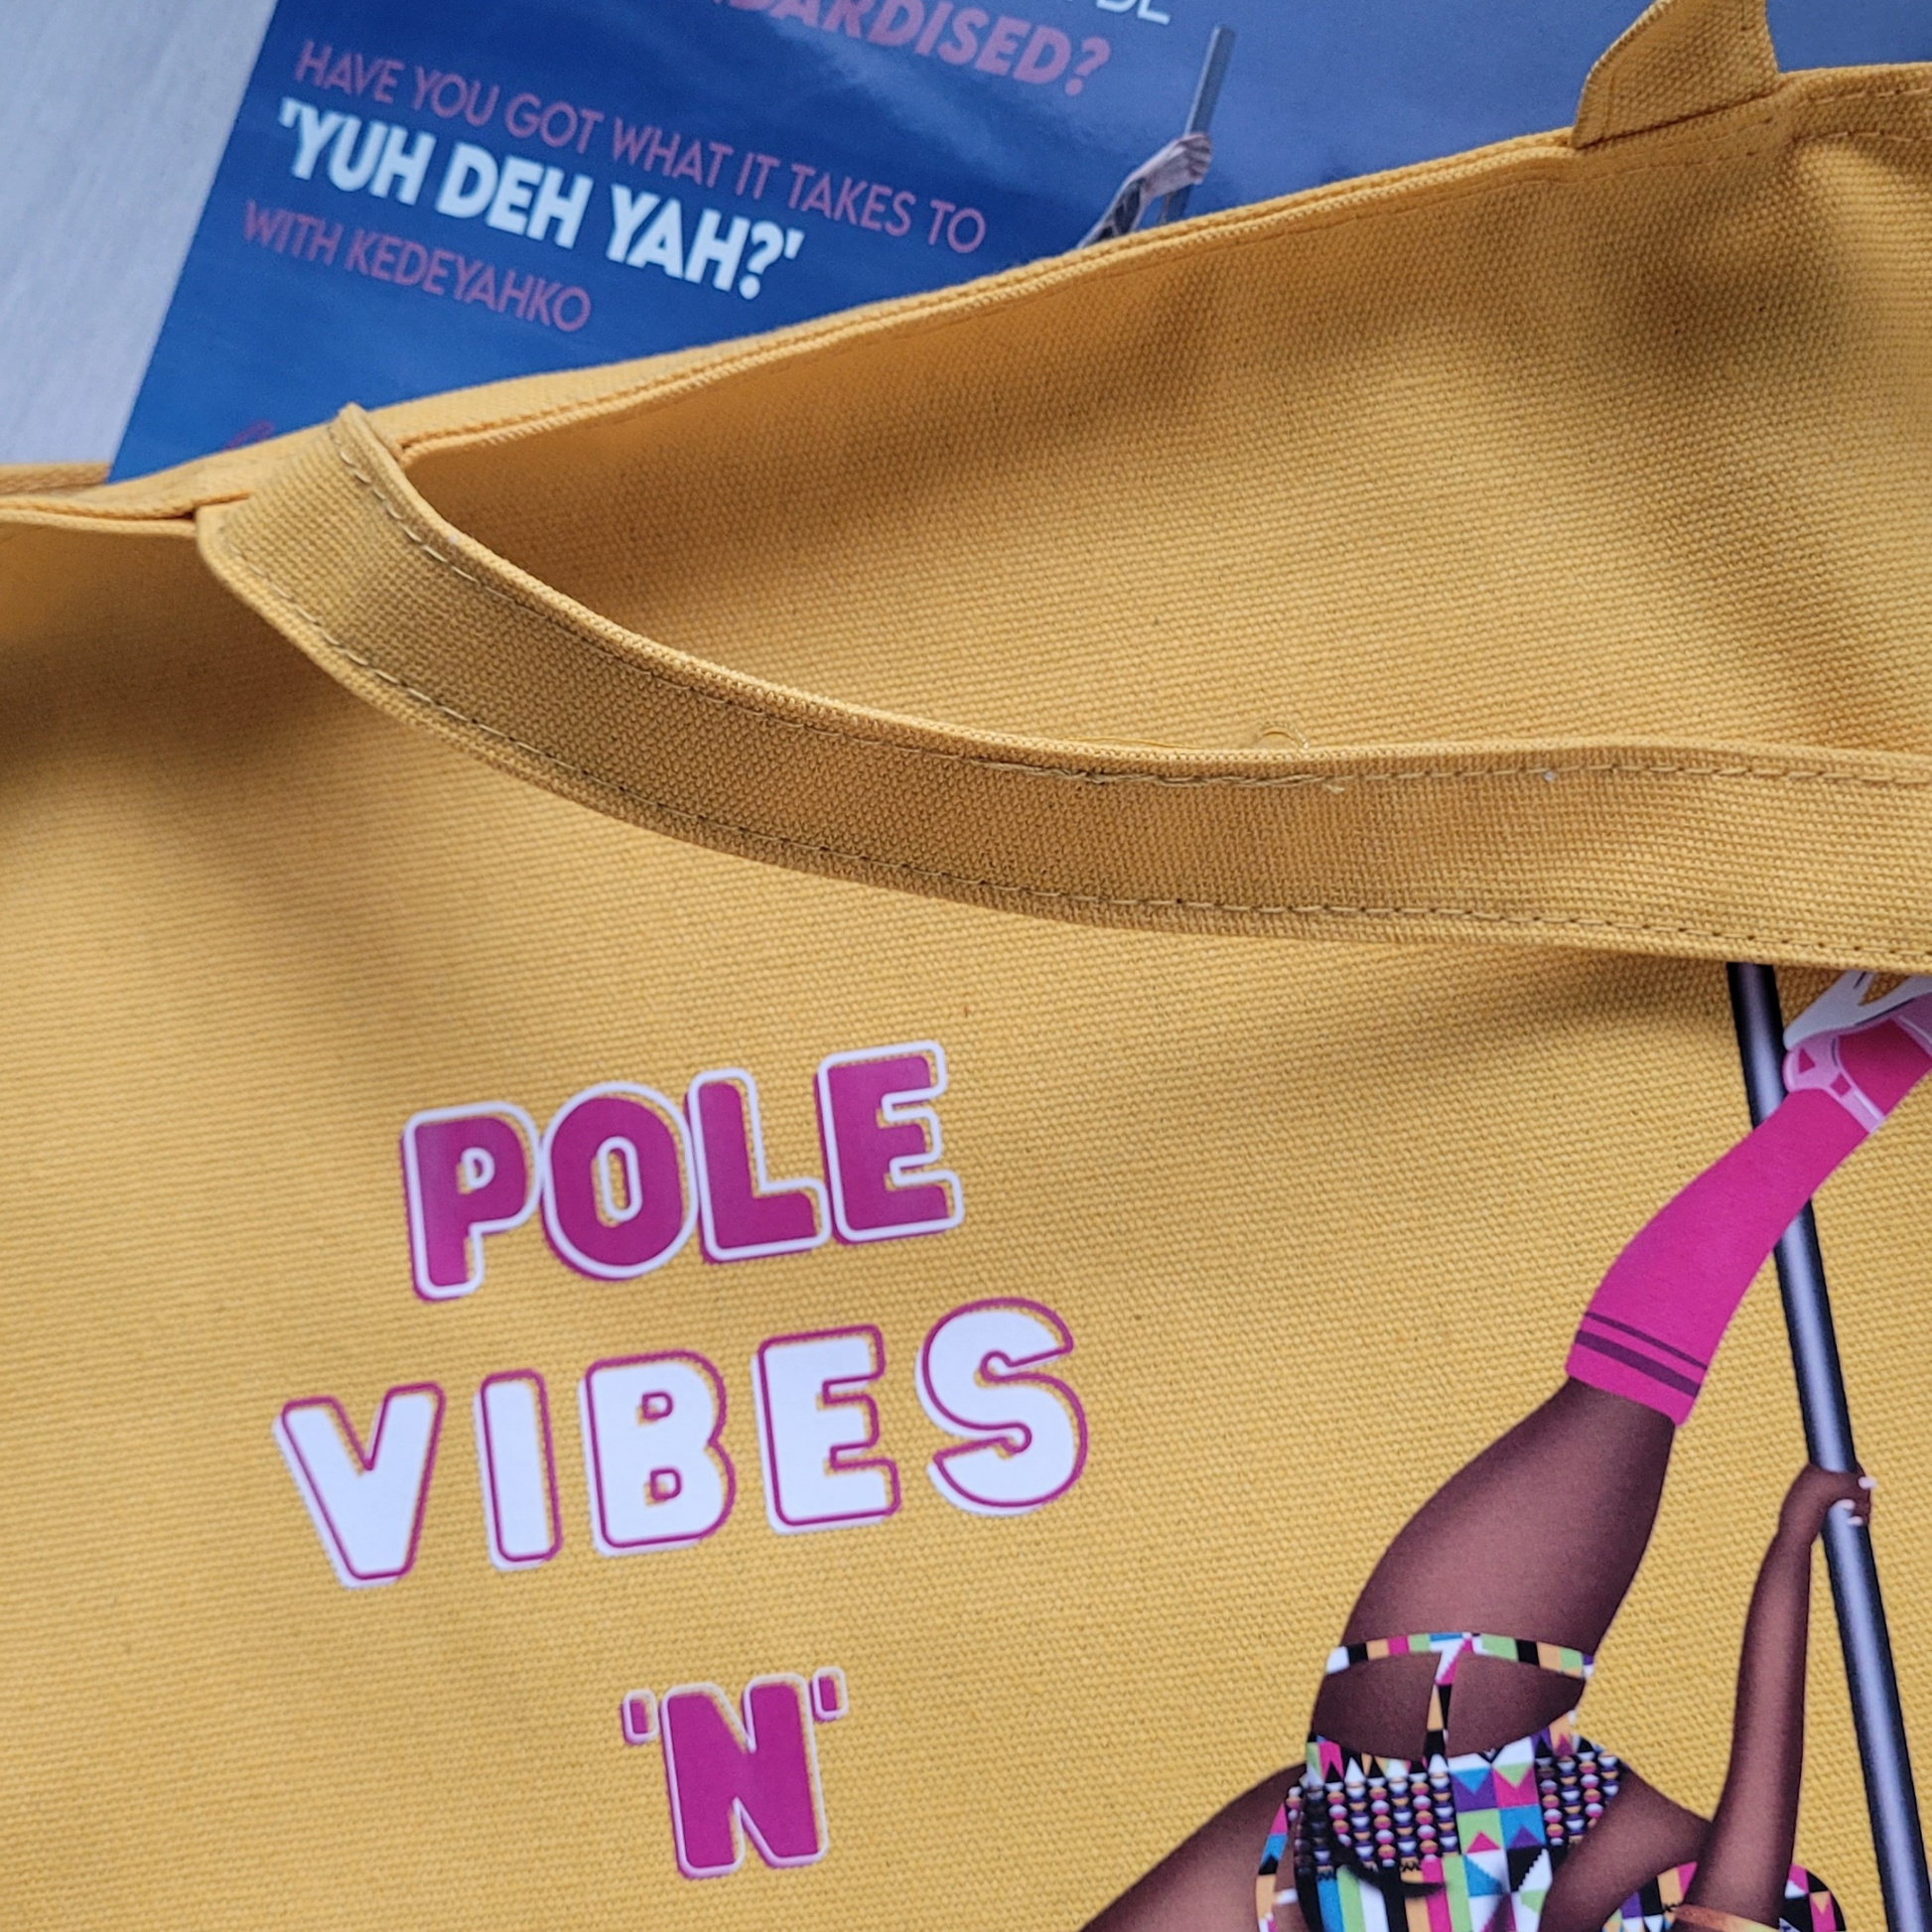 yellow tote bag featuring a black pole dancer wearing bright African inspired Afrocentric garter pole shorts and sports top Bright pink knee socks and clear platform heels in an extended butterfly pose with slogan affirmation pole vibes n thicc vibes